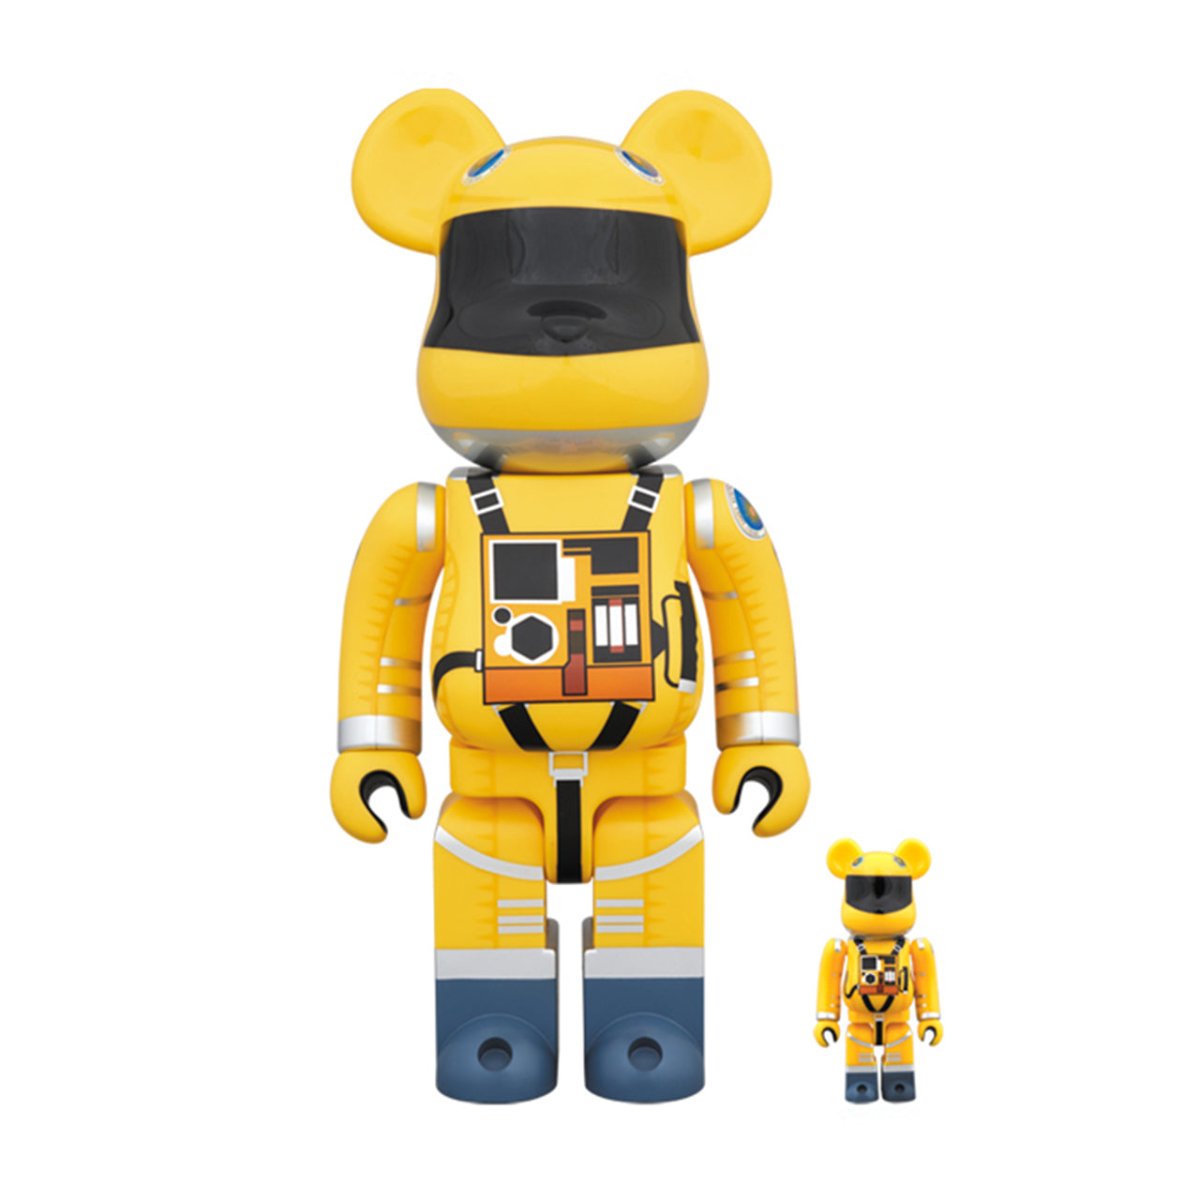 Medicom 100% + 400% Space Suit Be@rbrick Toy  - Allike Store